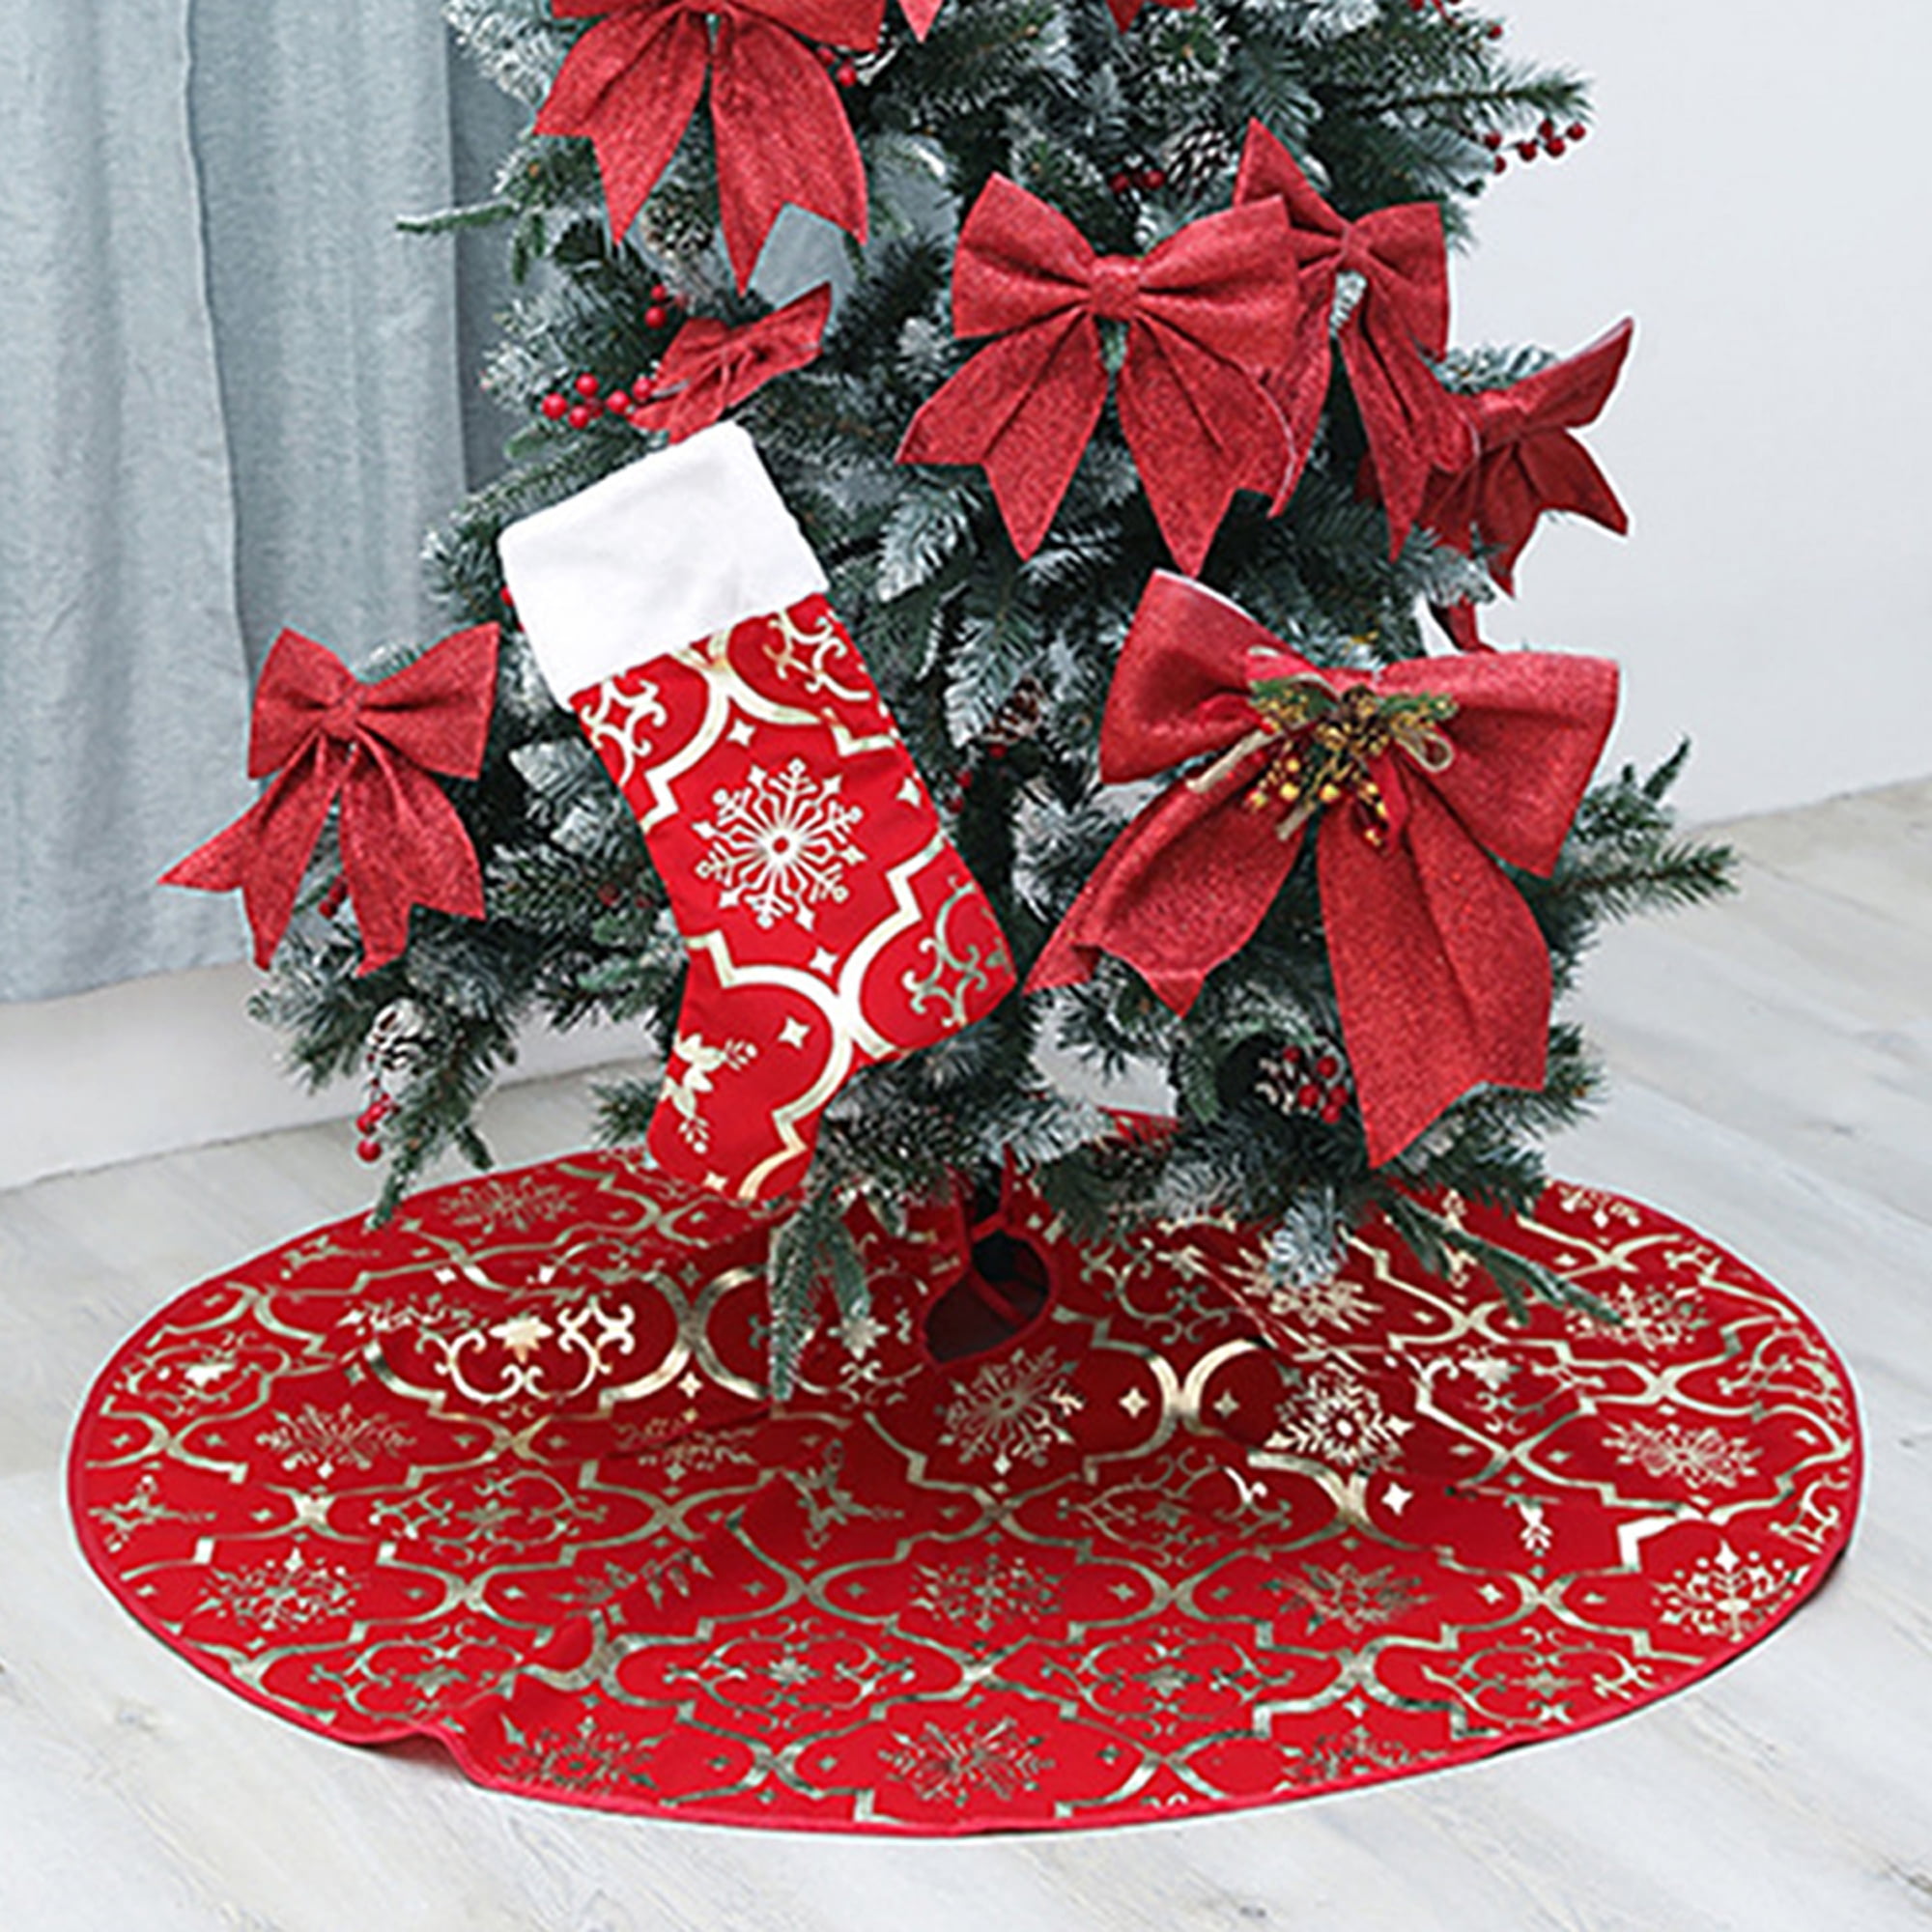 Details about   100cm Large Christmas Tree Skirt Red Home Xmas Floor Ornament Party Decor